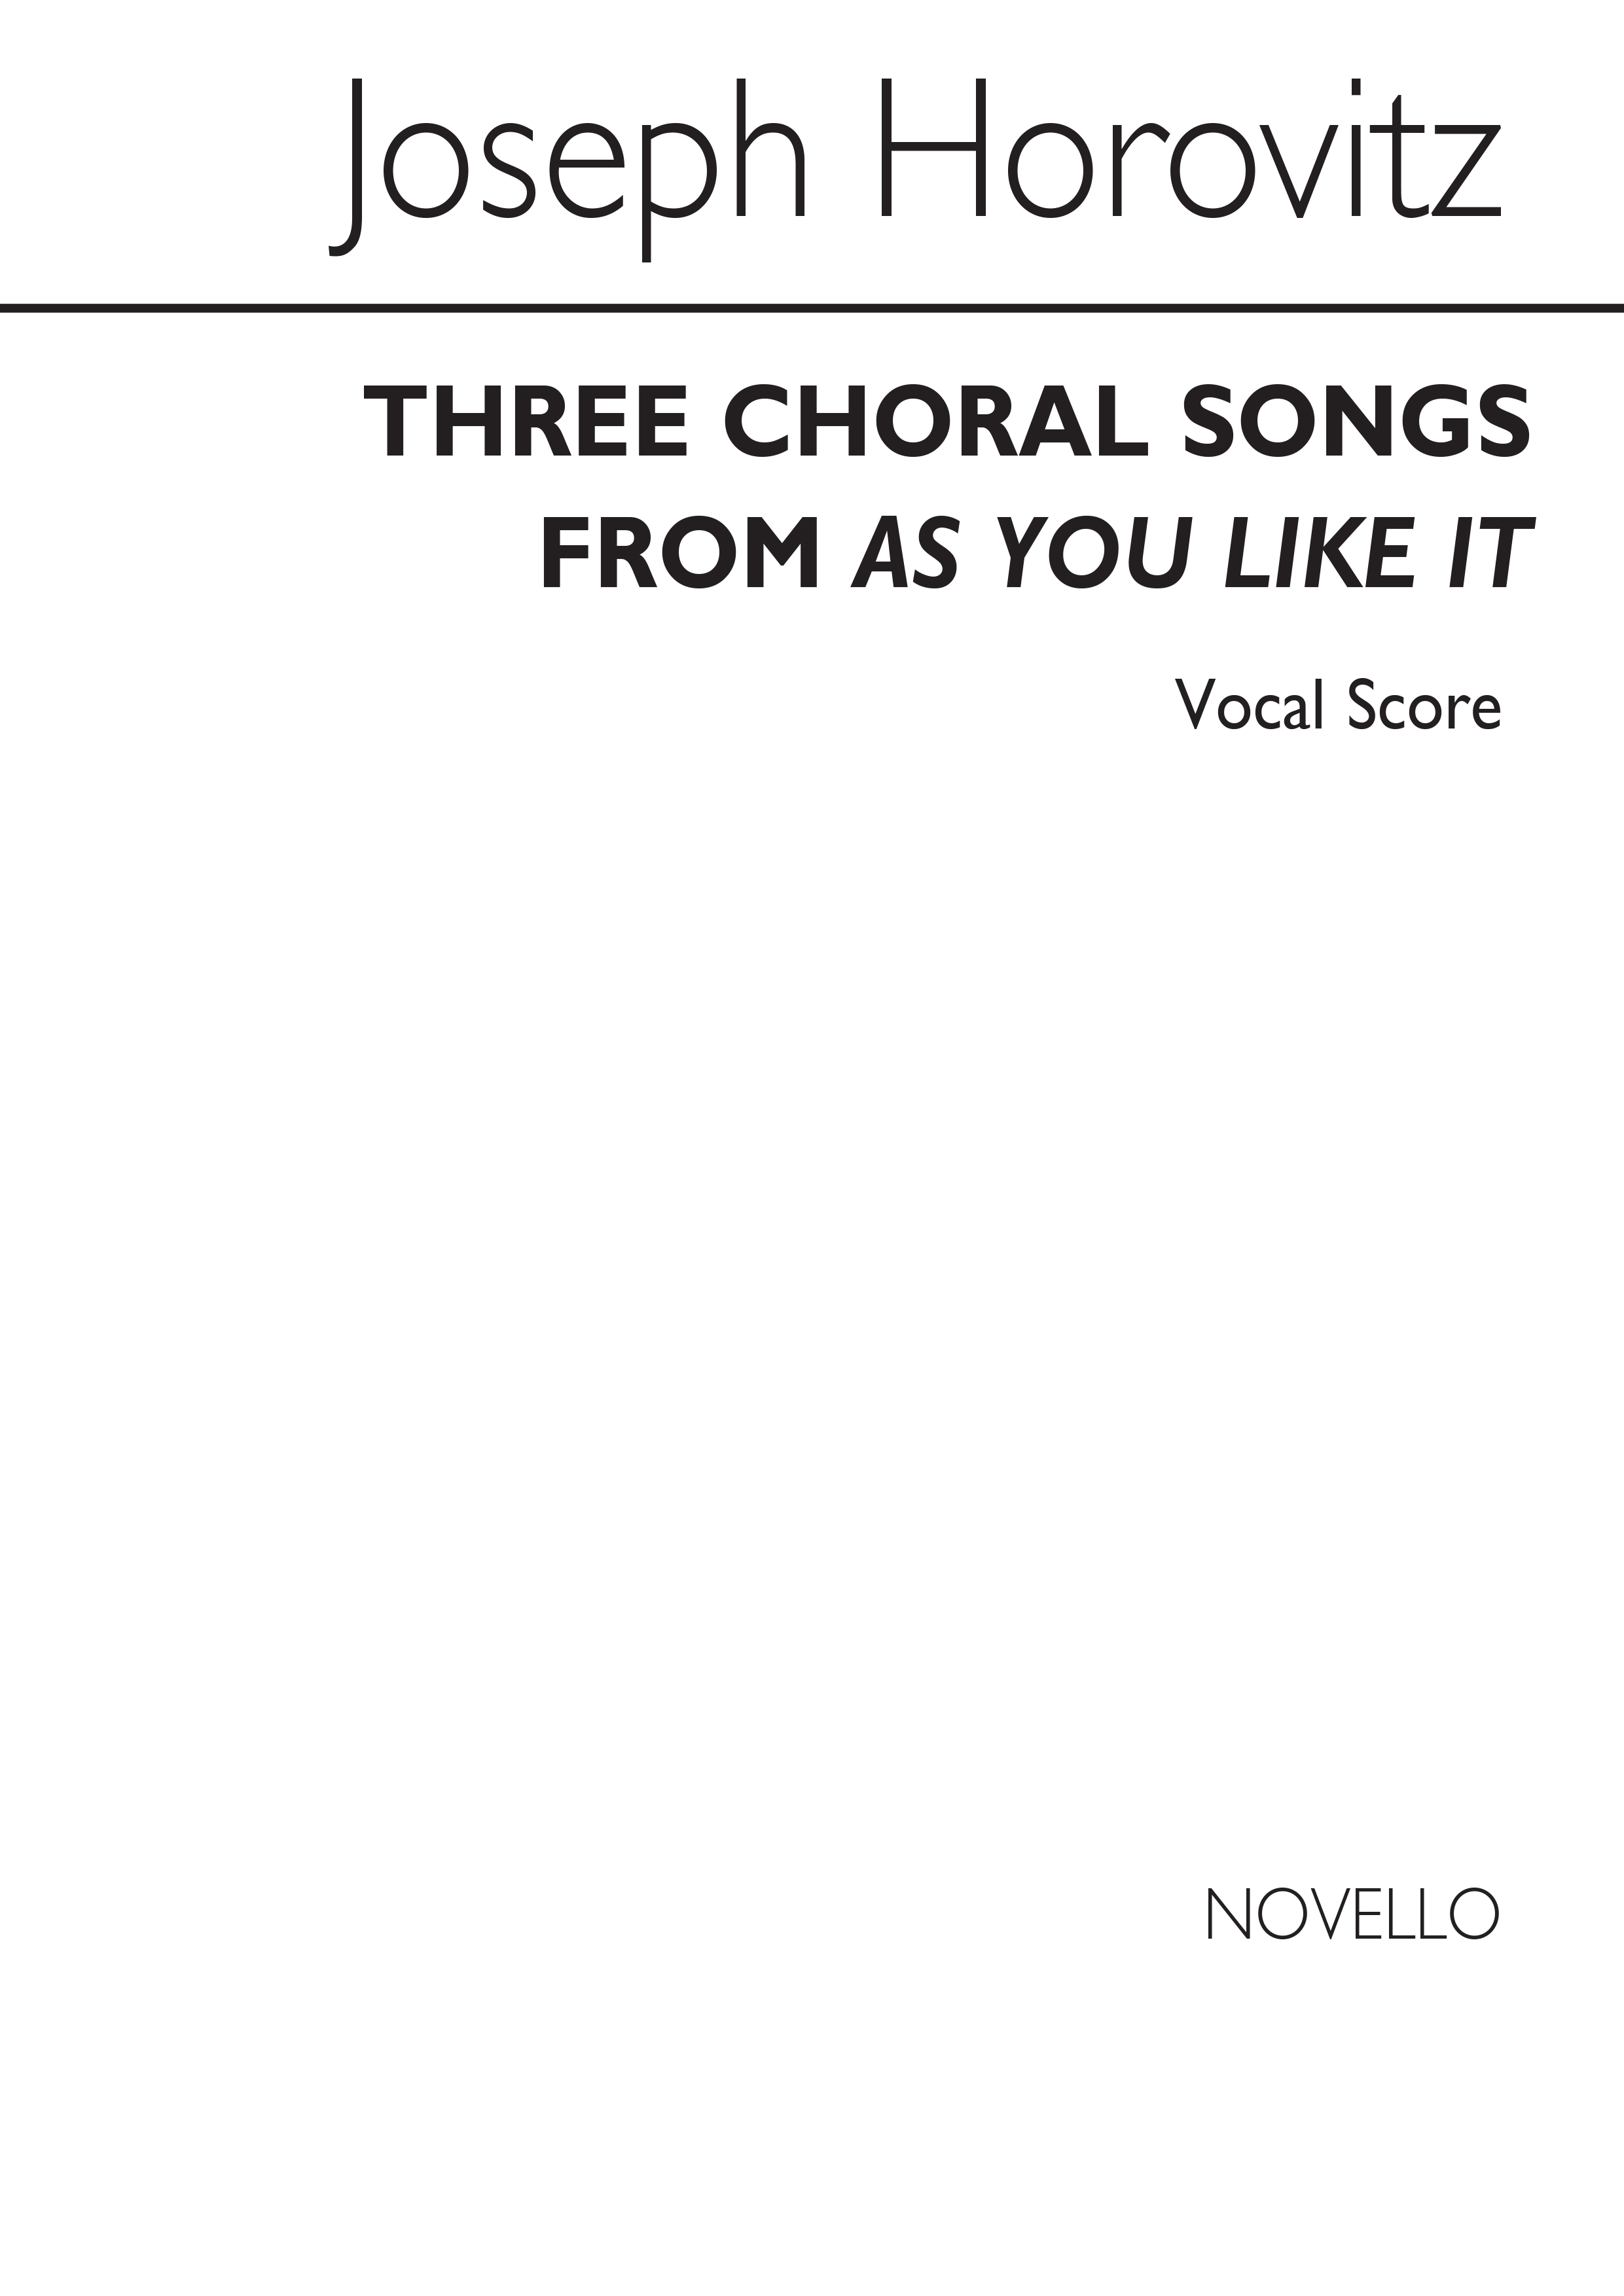 Horovitz: Three Choral Songs From 'As You Like It' (Vocal Score)